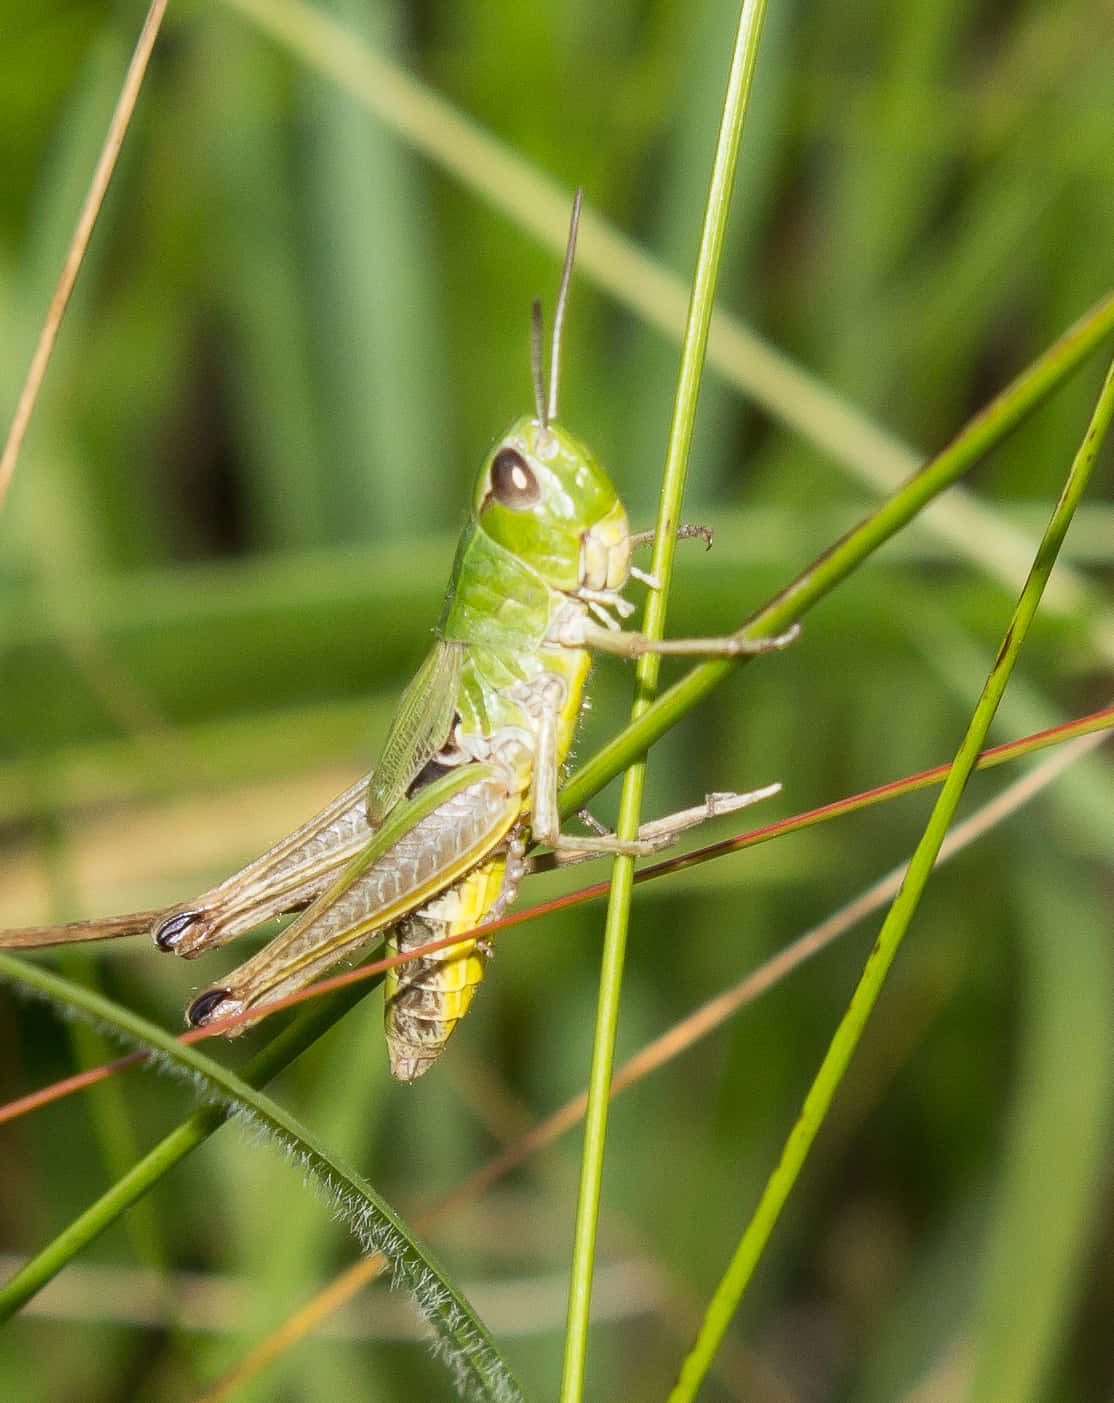 A close-up of a green grasshopper perched on a dewy leaf